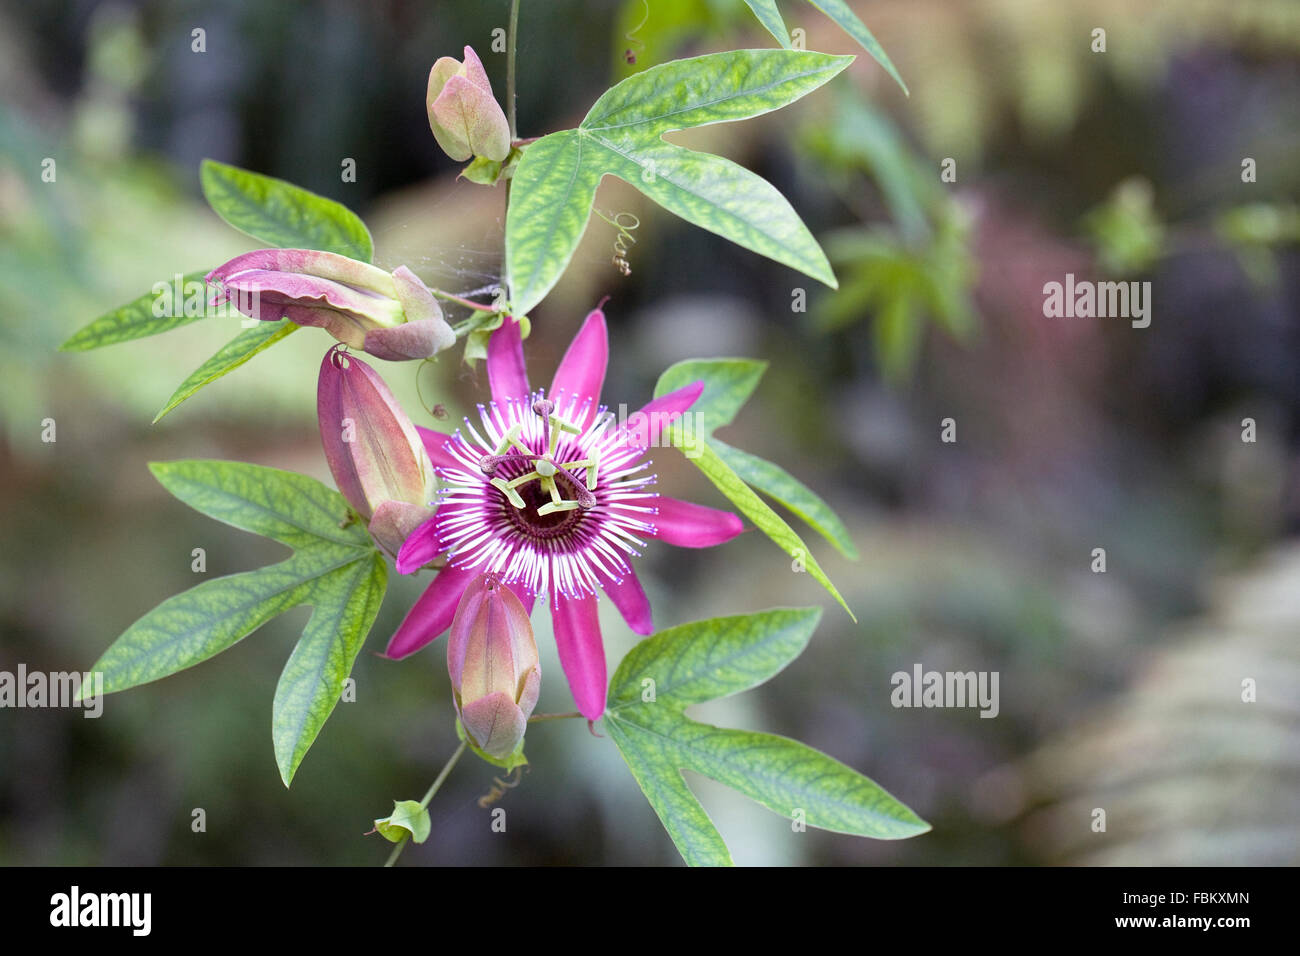 Passiflora x violacea flower. Passion flower growing in a protected environment. Stock Photo